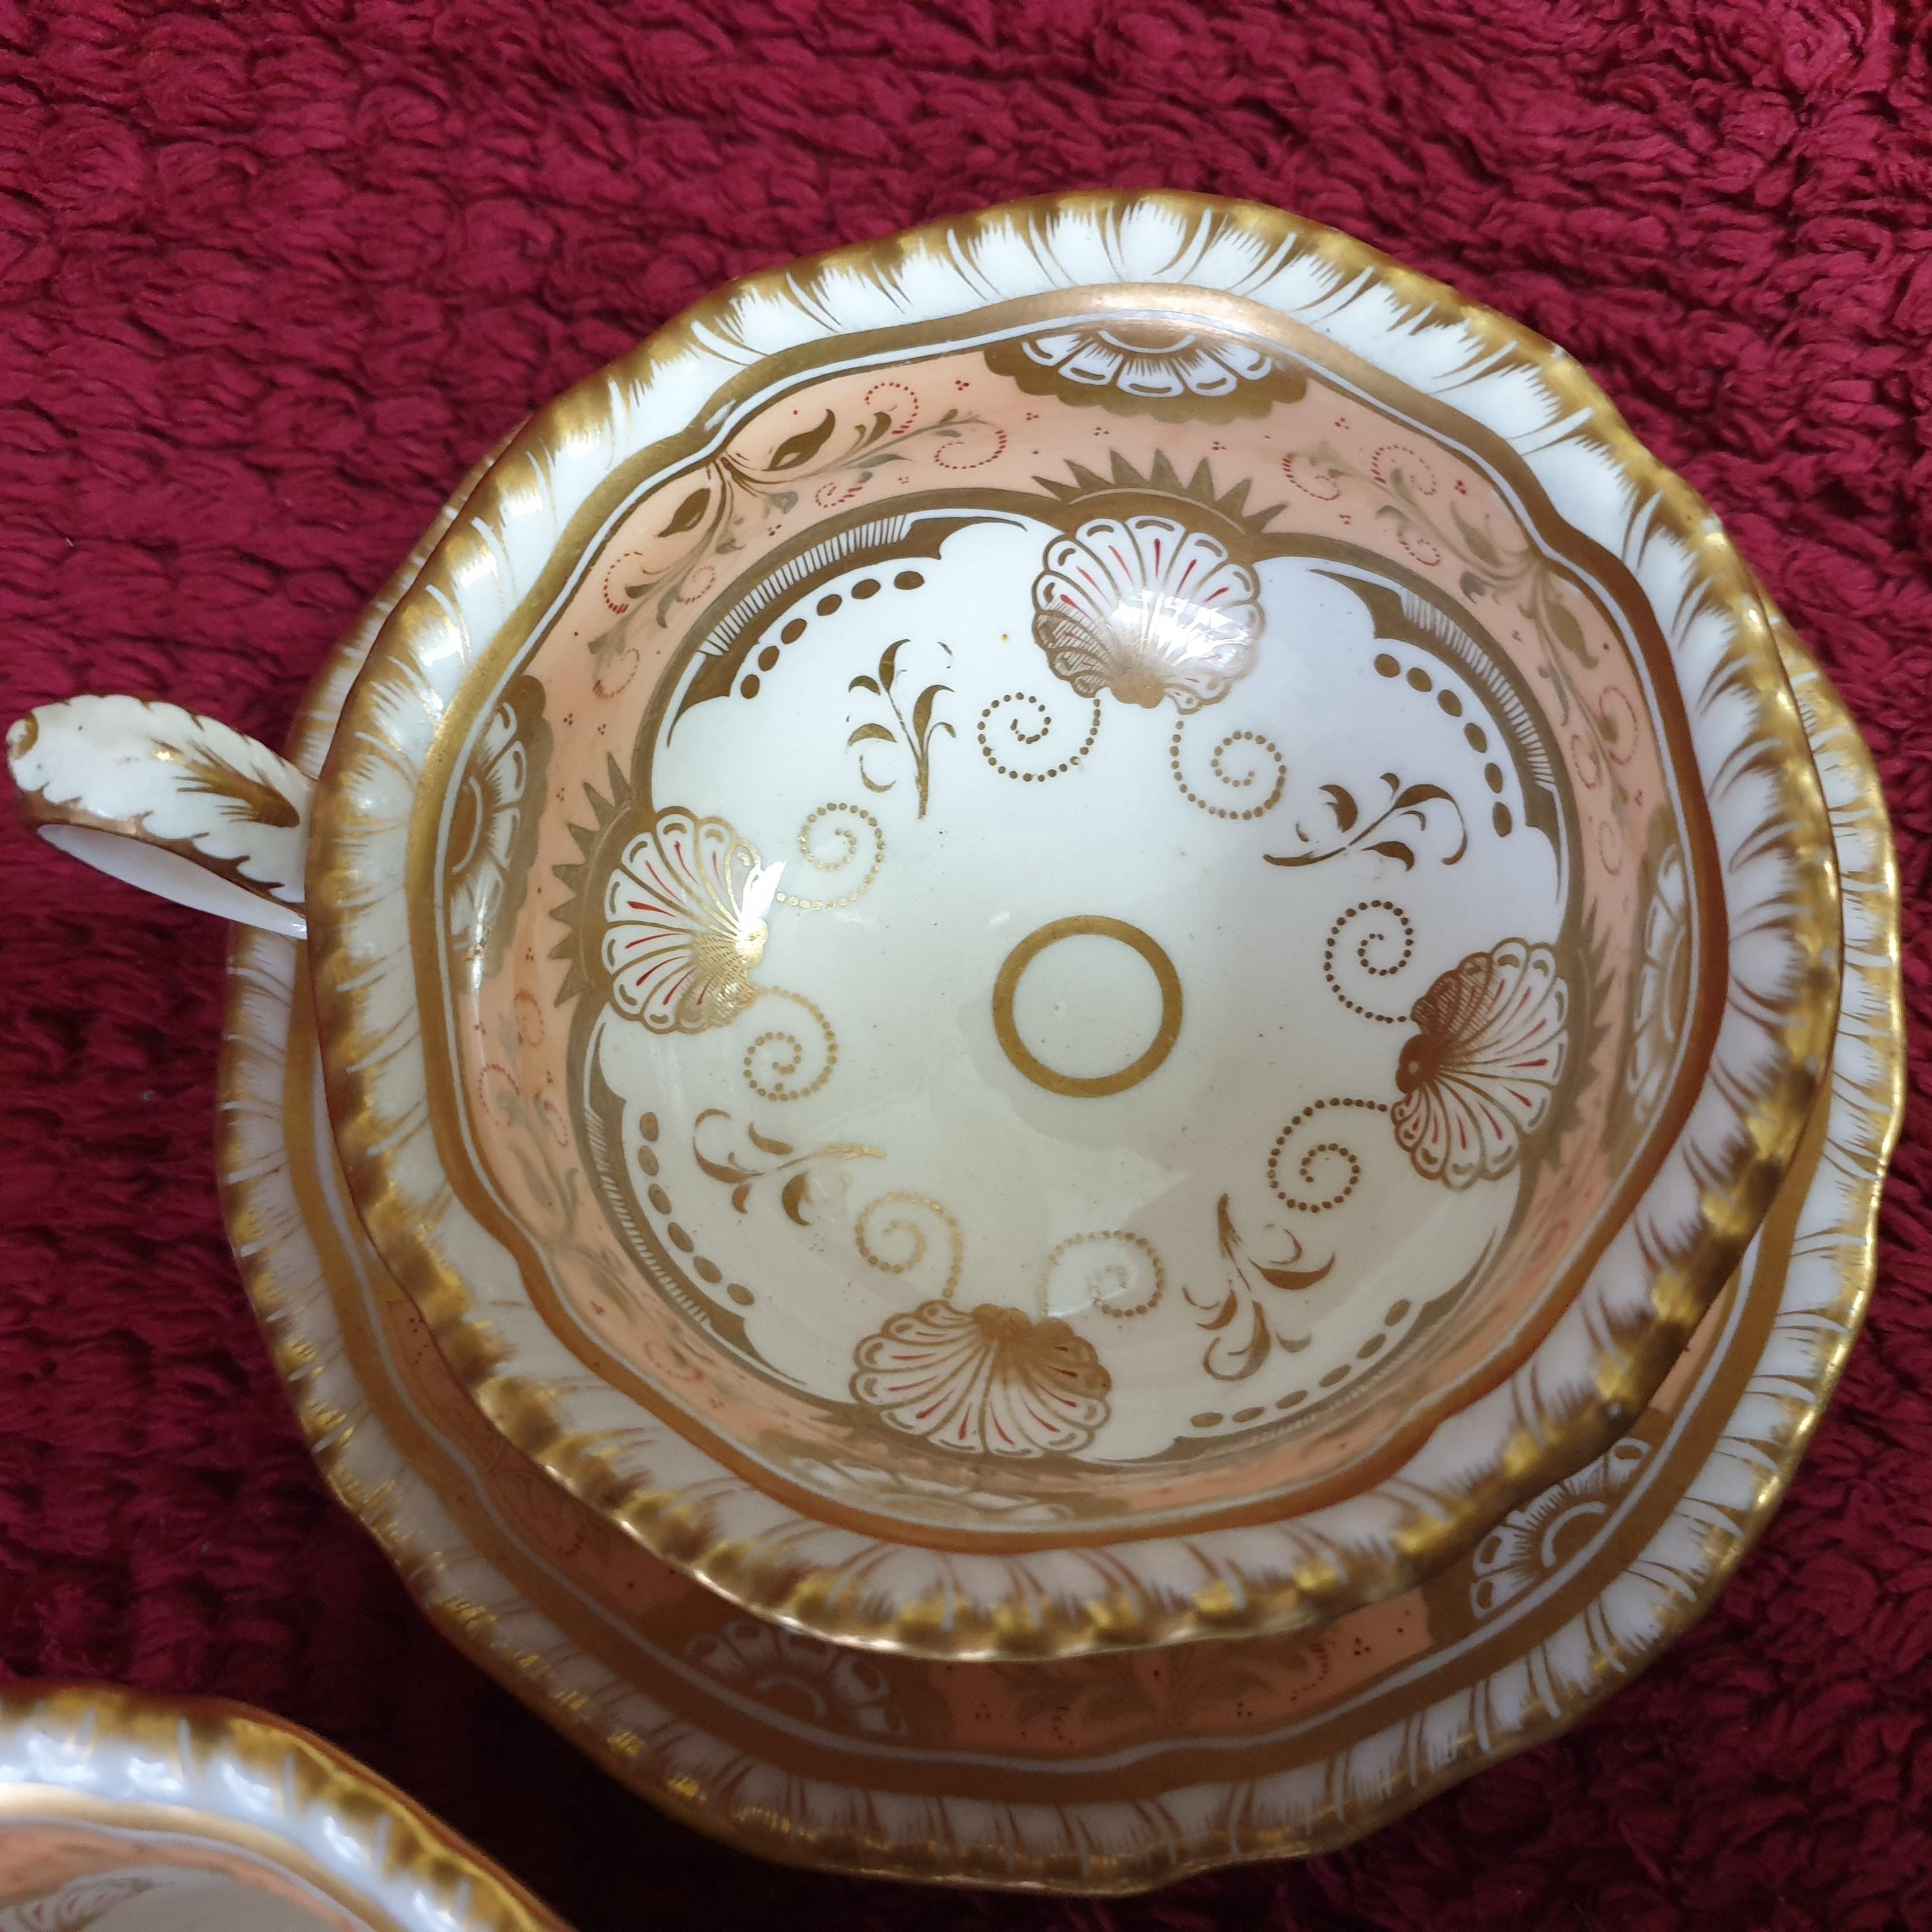 A beautiful H&R Daniel trio in the Second Gadroon shape in a salmon colour. Rounded handles with a gilt floral design with vines and leaves on the outside of both cups while the saucer and the inside of the cups is done in salmon highlighted in gilt